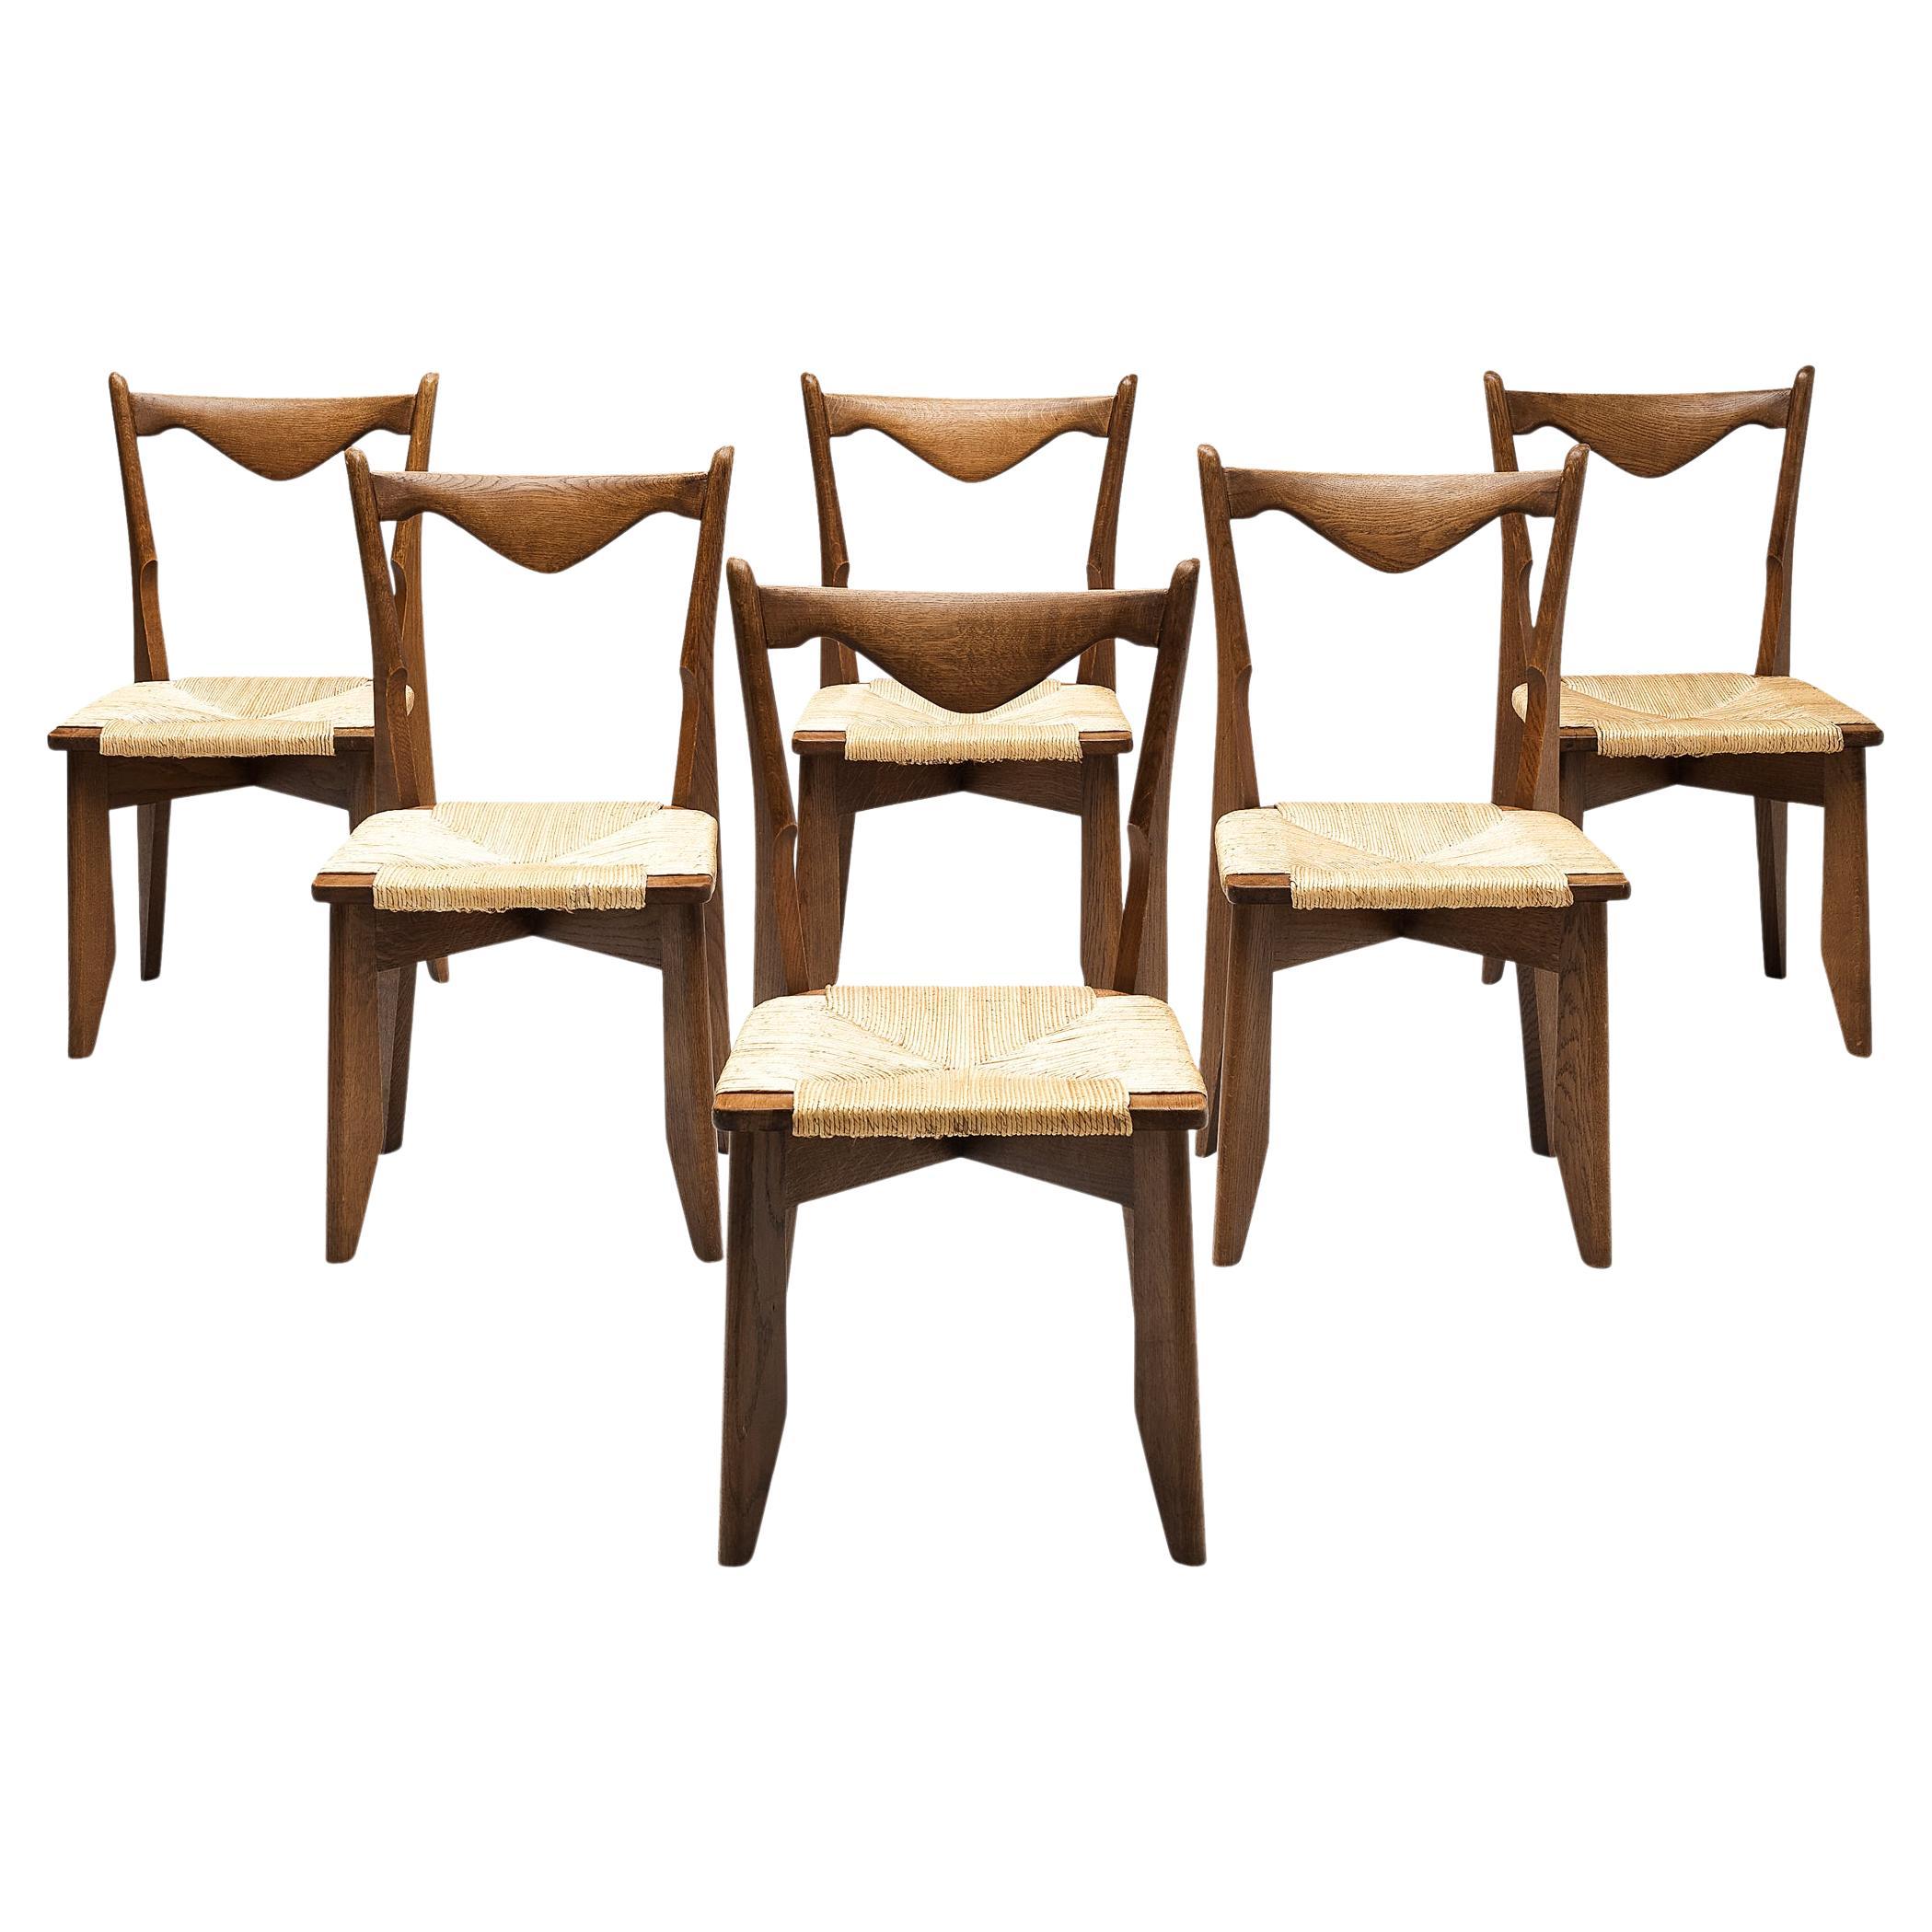 Guillerme et Chambron Set of Six Dining Chairs in Oak and Straw Seats